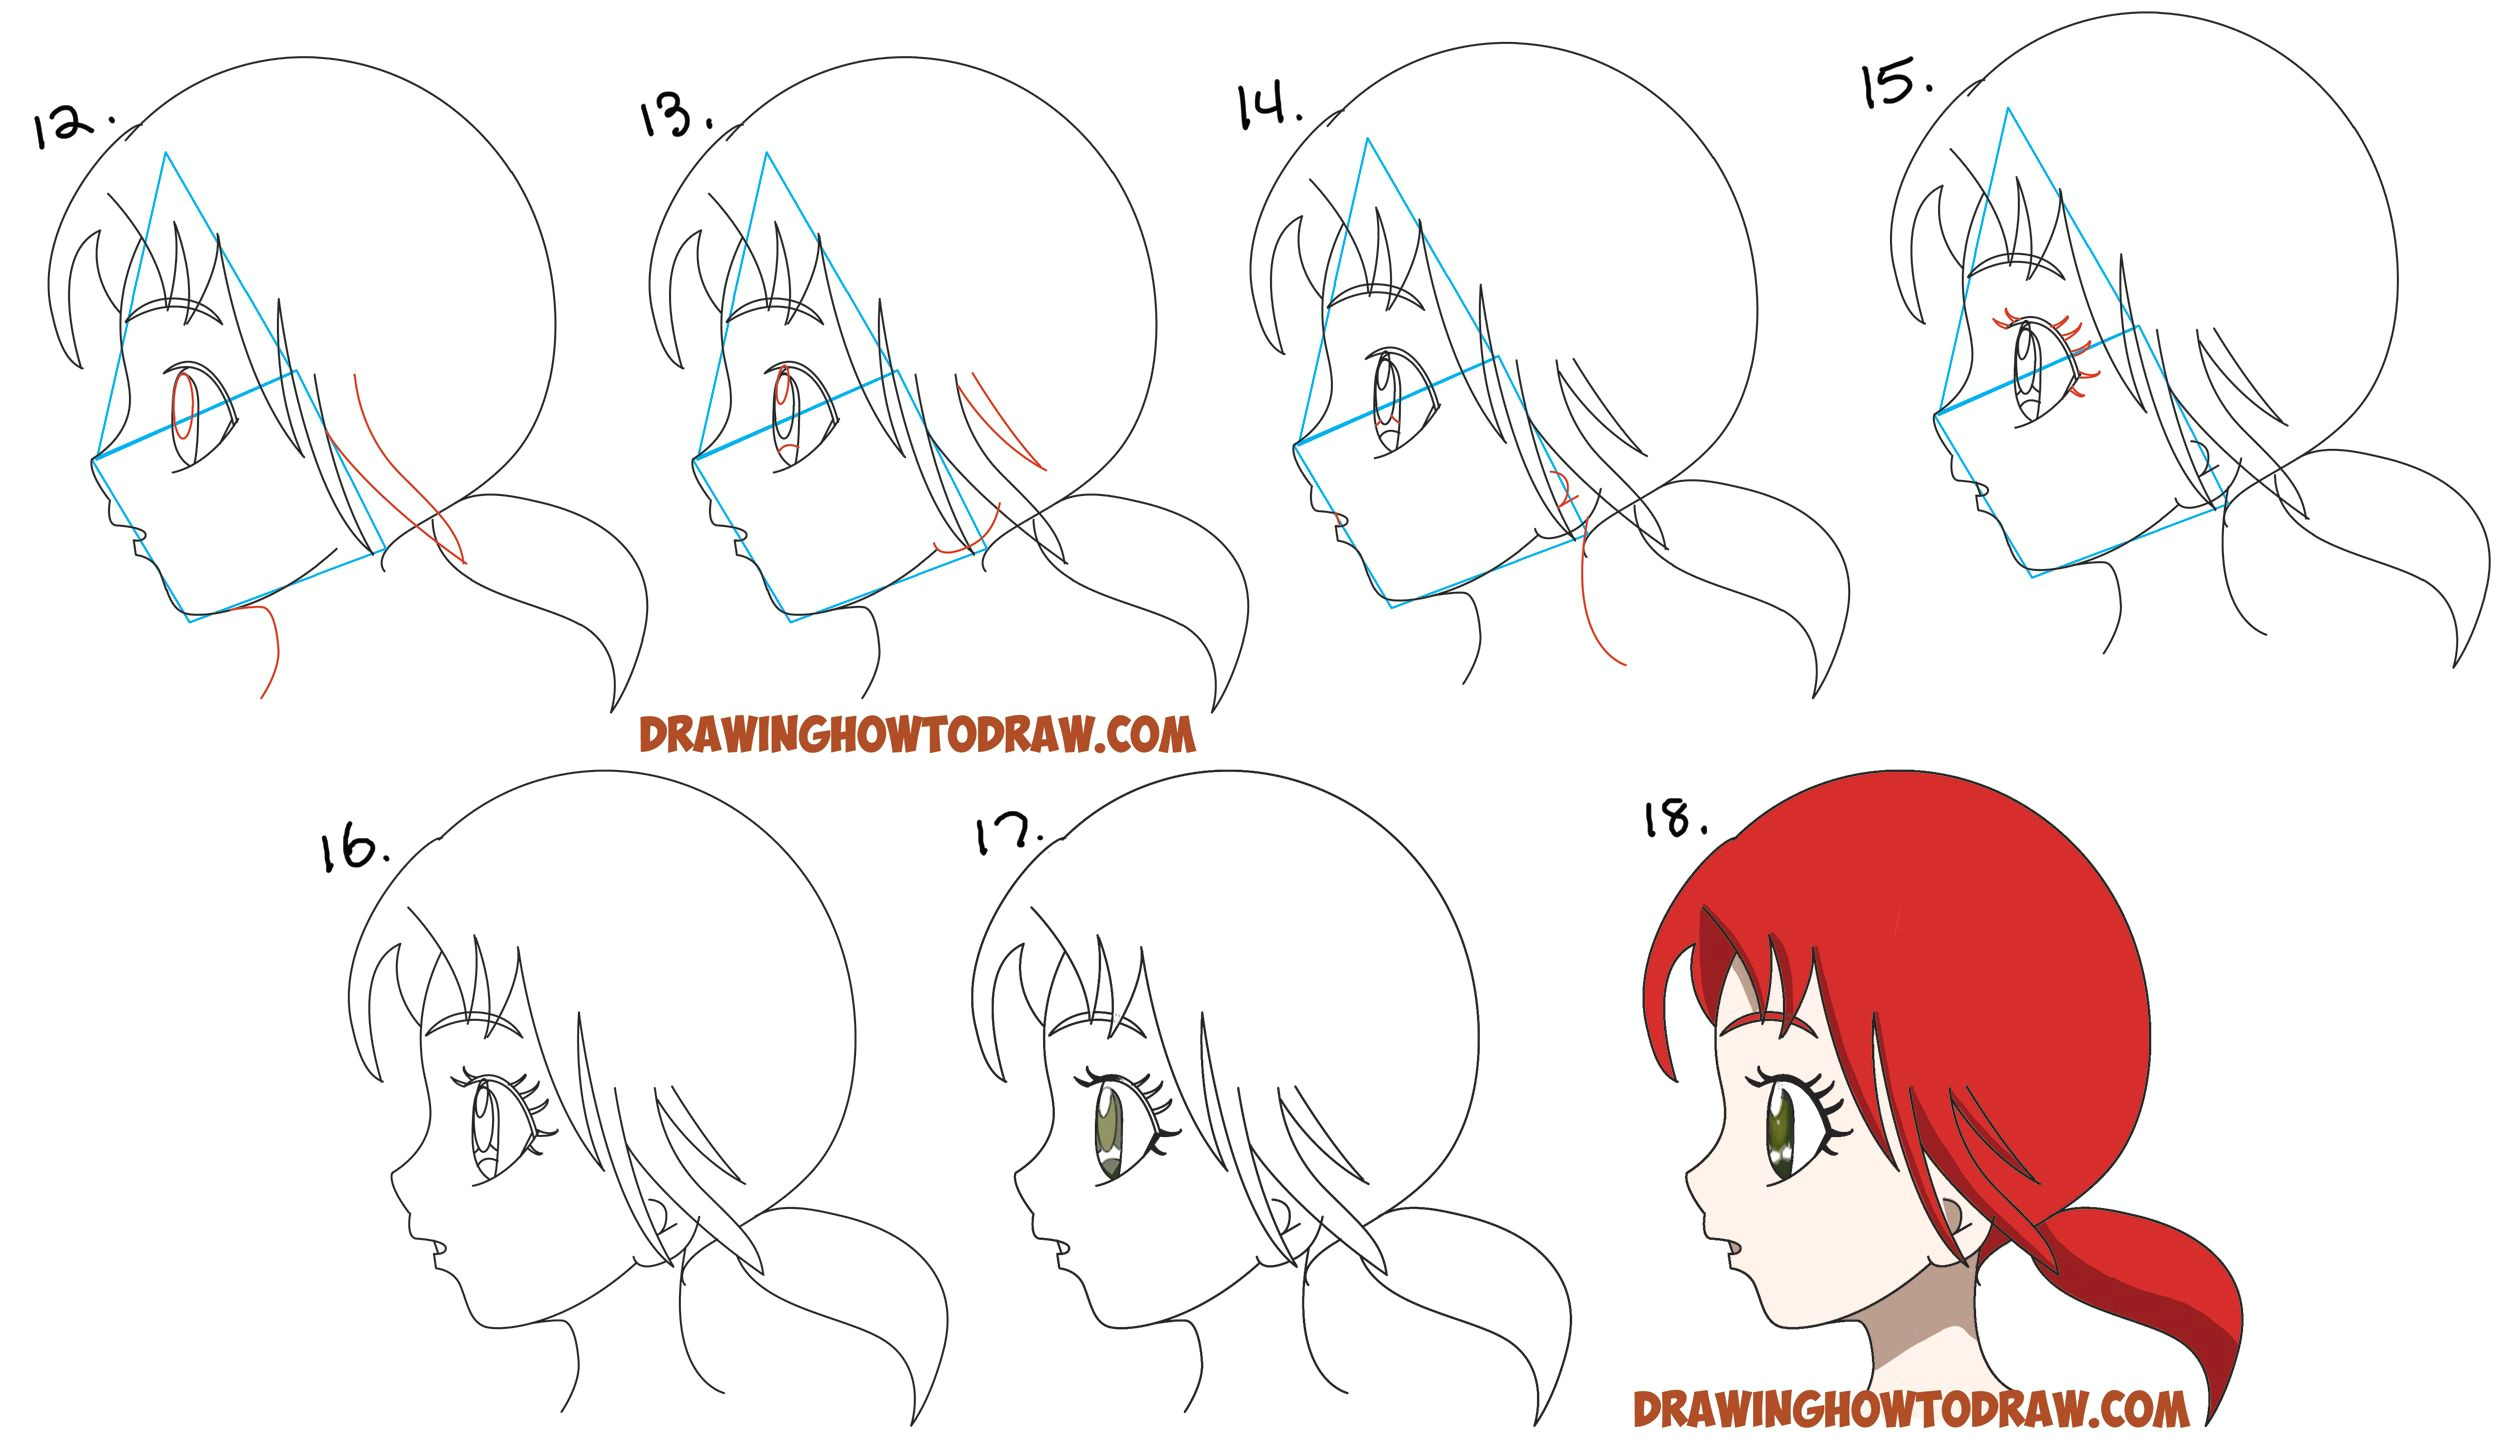 Drawing Anime Side Face Learn How to Draw An Anime Manga Girl S Face and Eyes From the